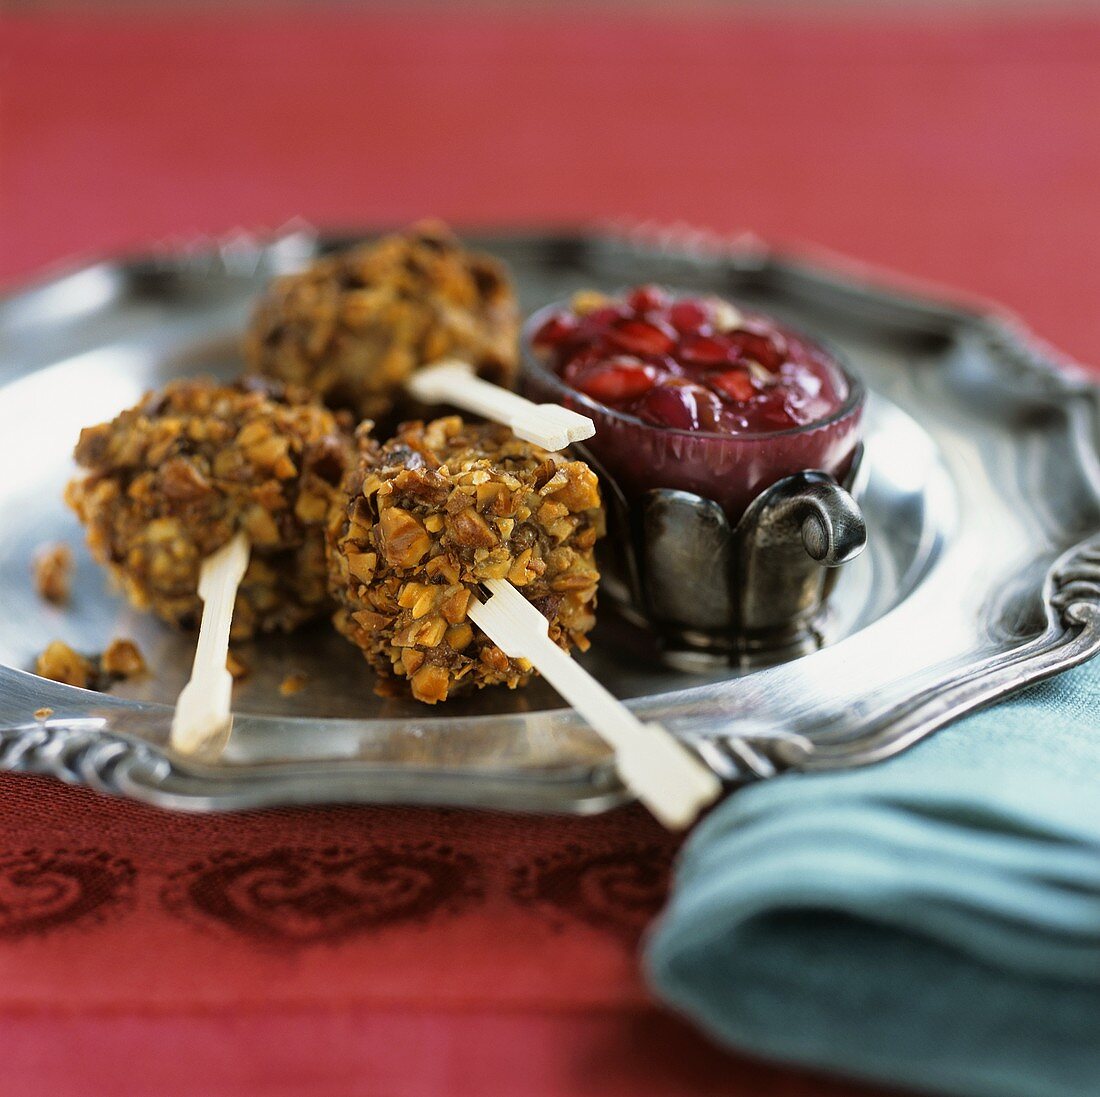 Chicken with nut crust and pomegranate dip